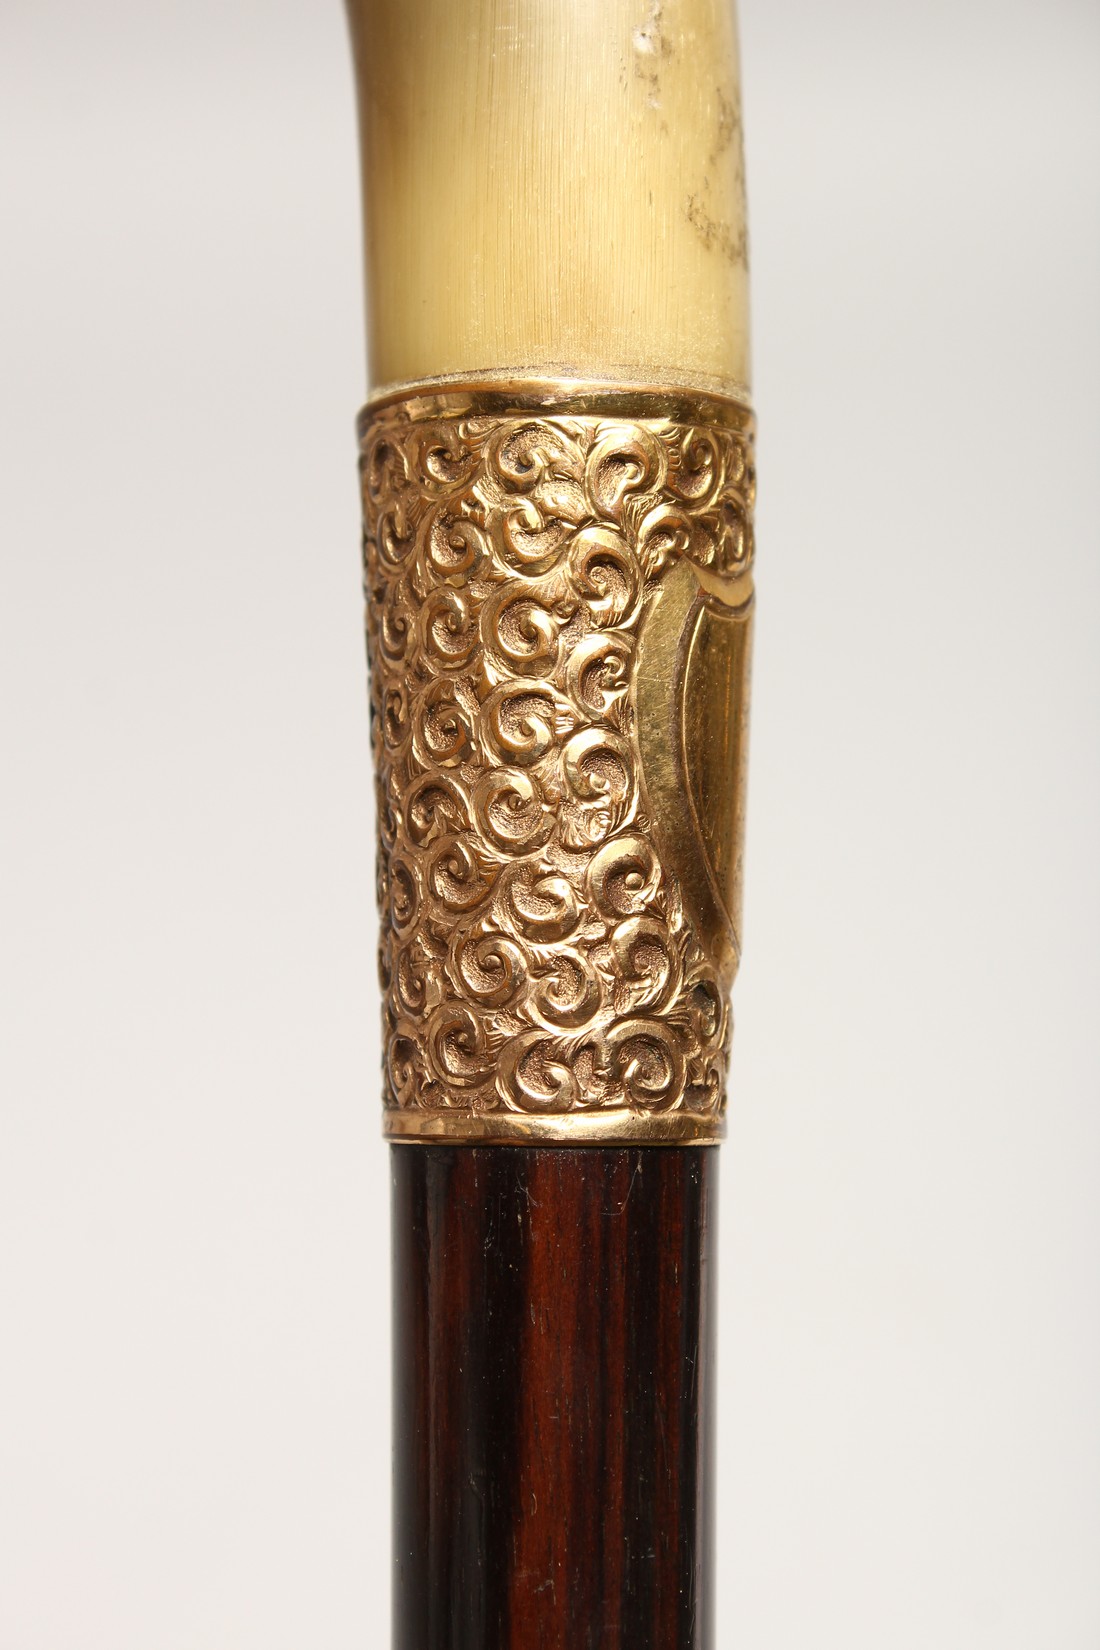 A VERY GOOD 19TH CENTURY RHINO HANDLE WALKING STICK with gilt band 2ft 10ins long - Image 10 of 11